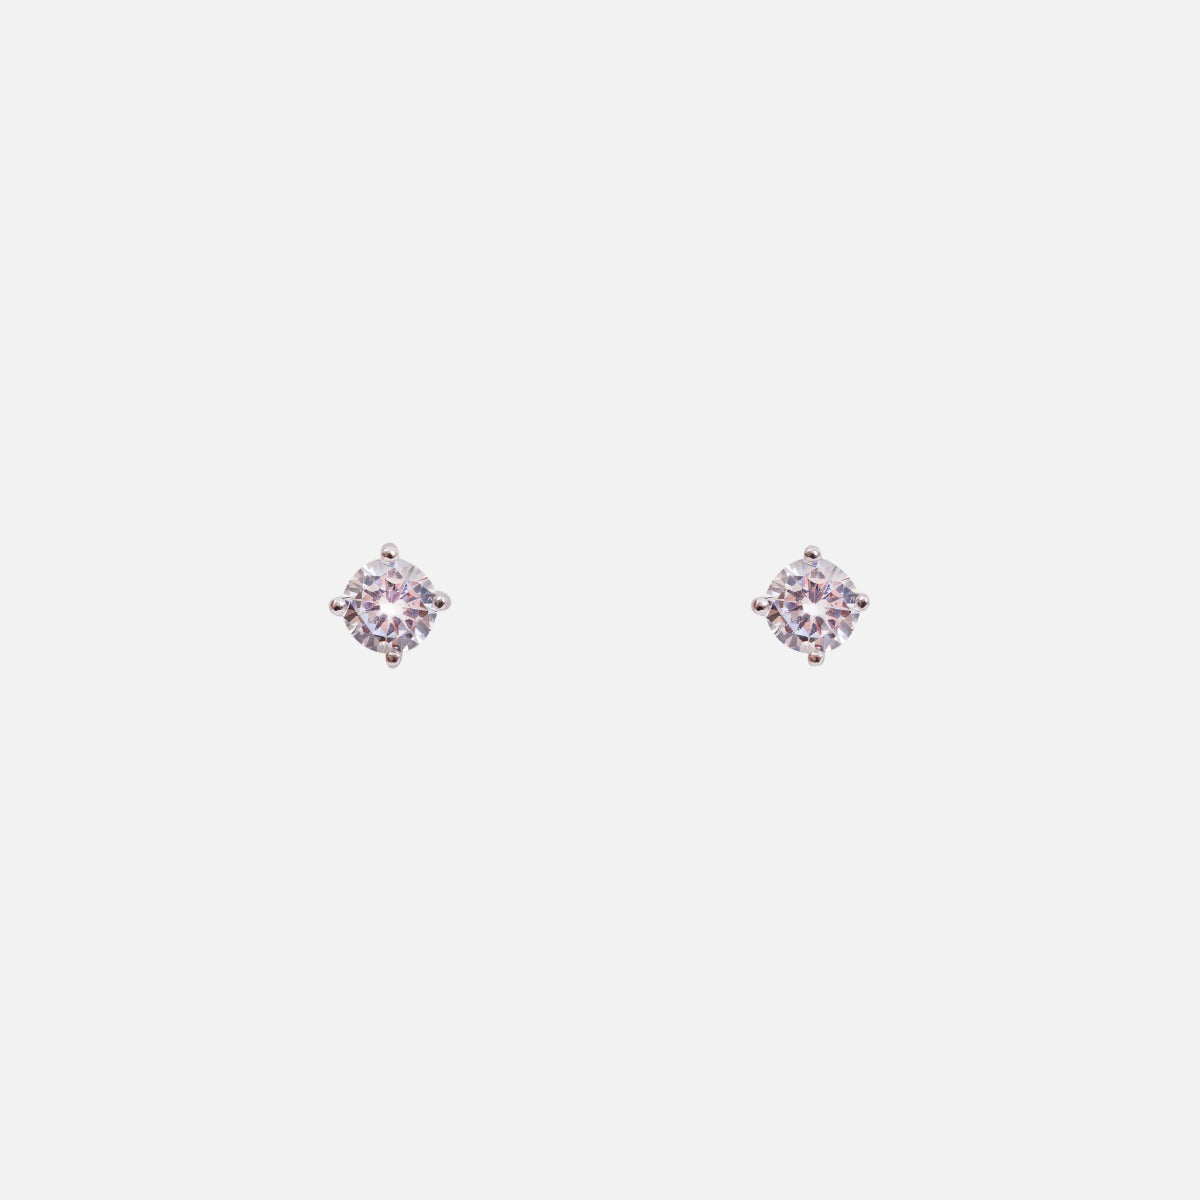 Sterling silver round shape earrings with cubic zirconia 4mm